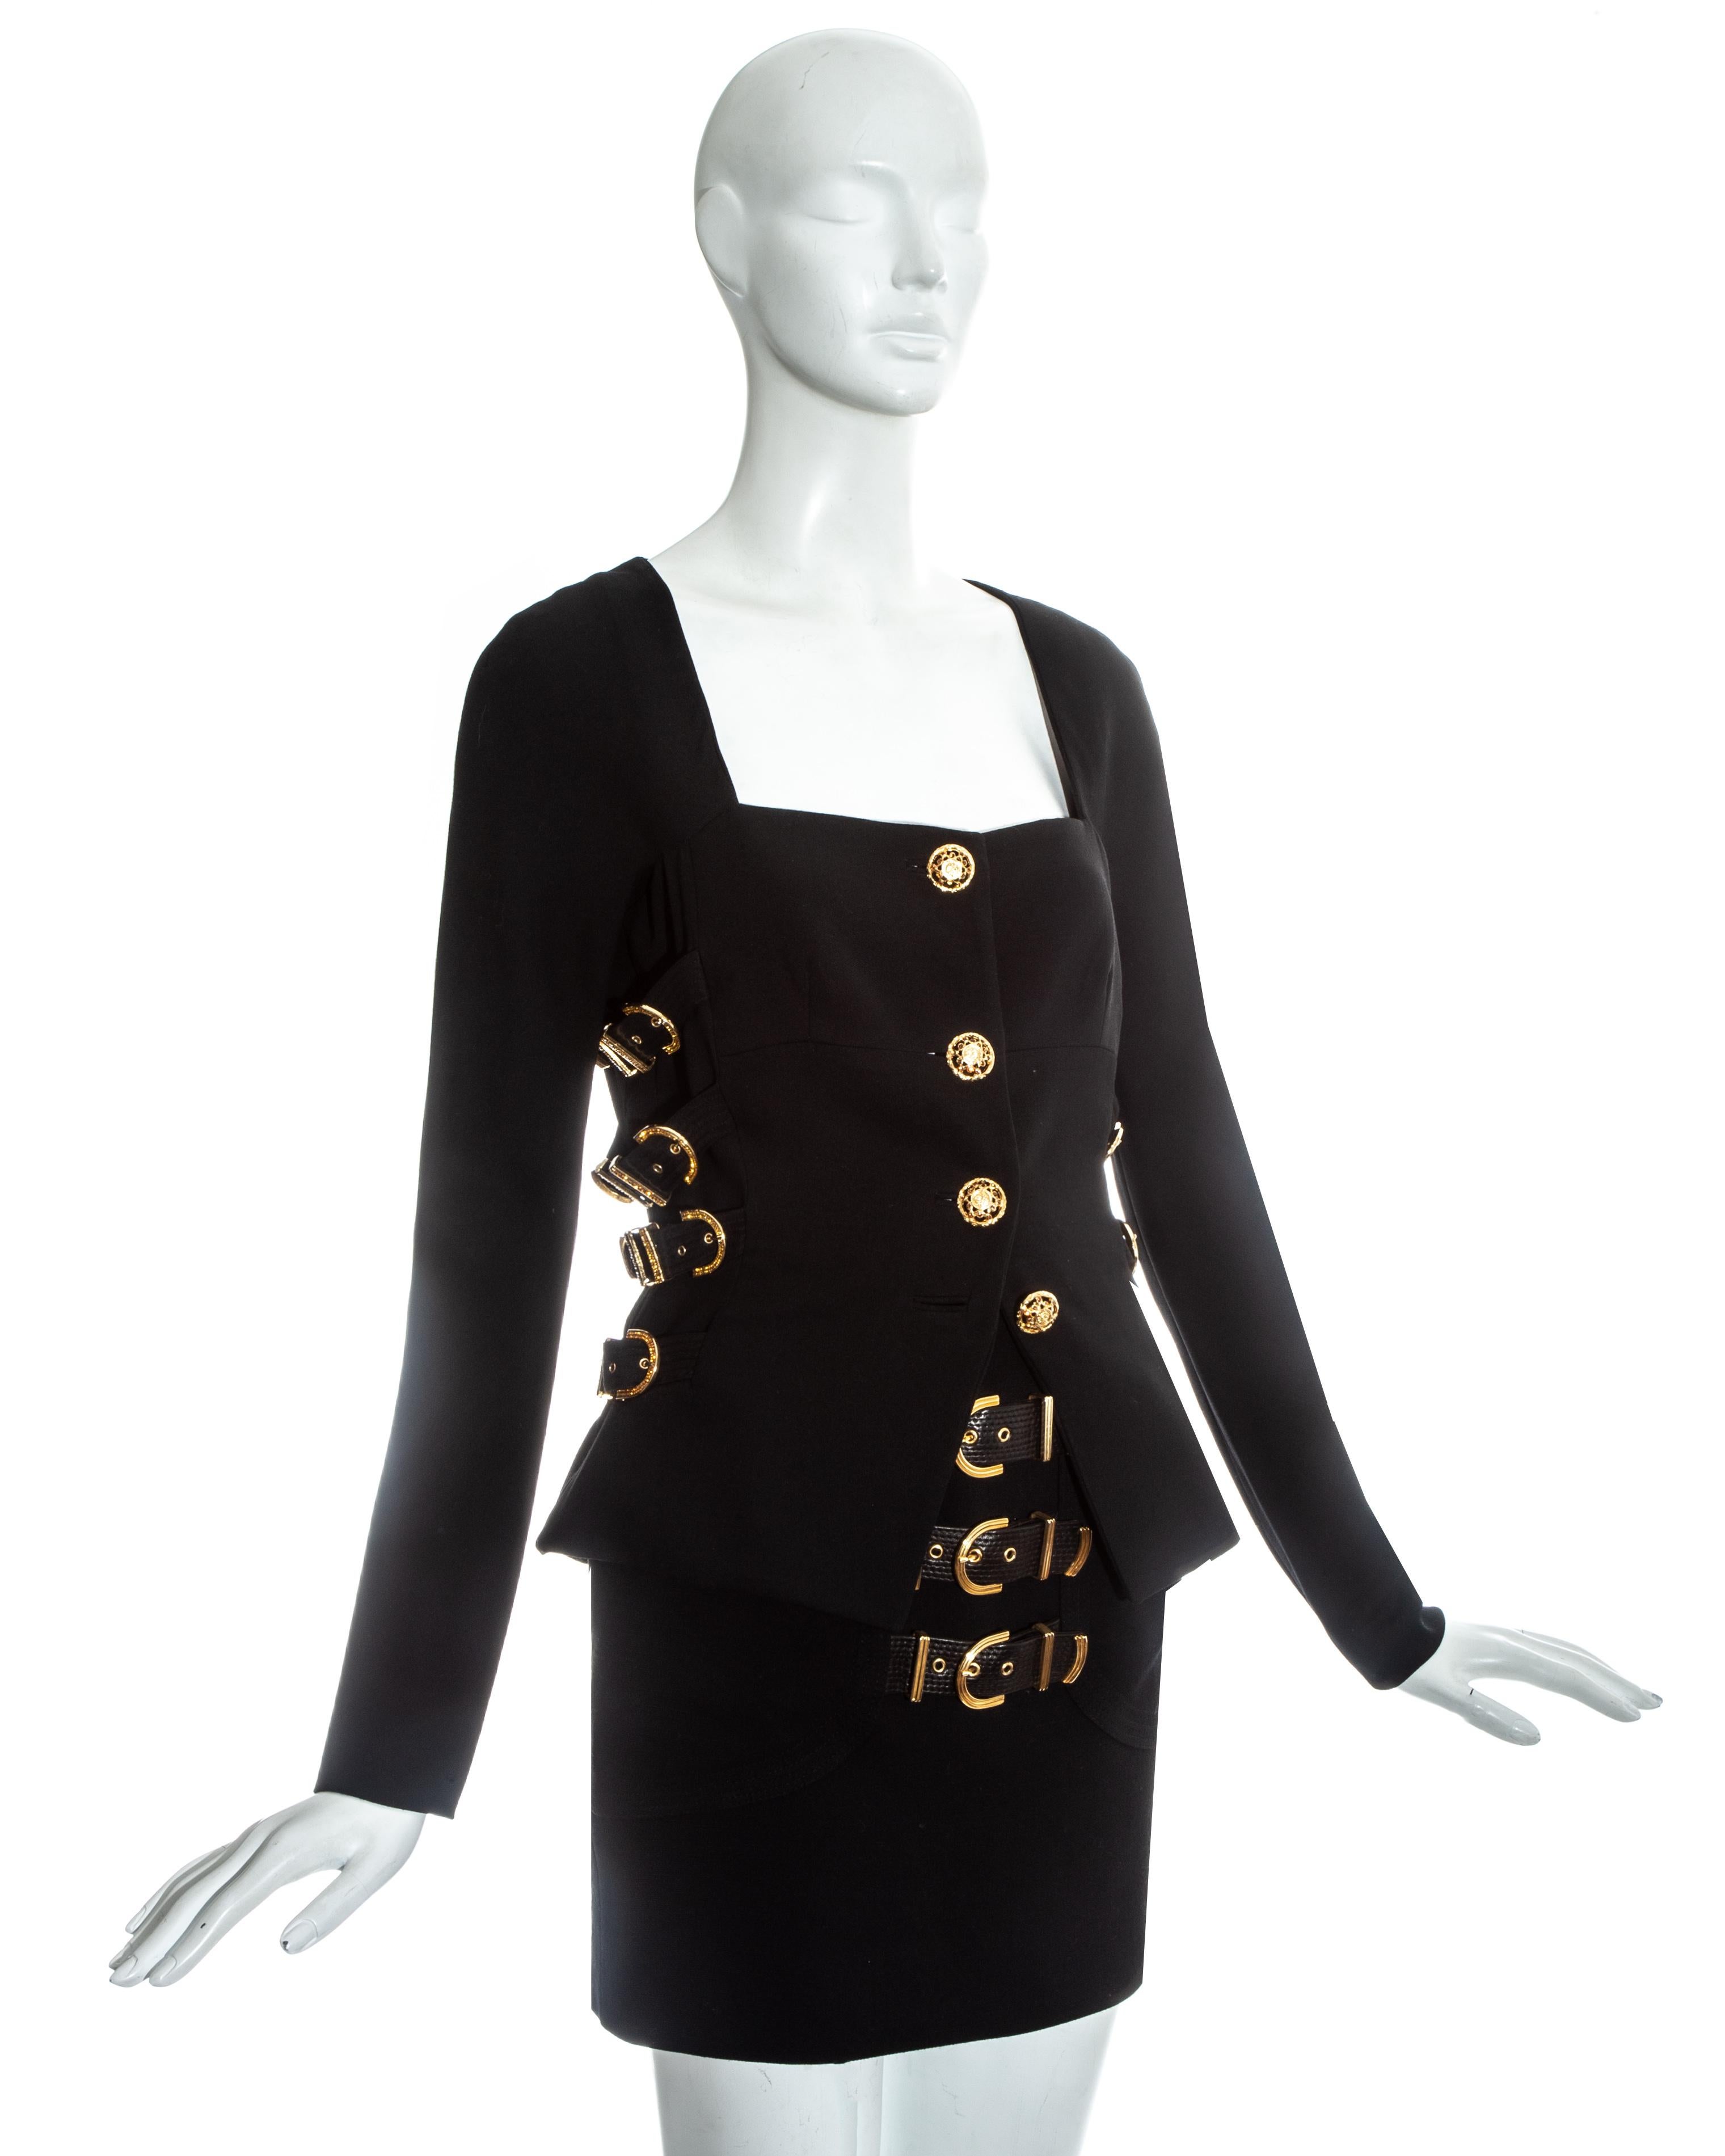 Black Gianni Versace black wool skirt suit with gold bondage buckles, fw 1992